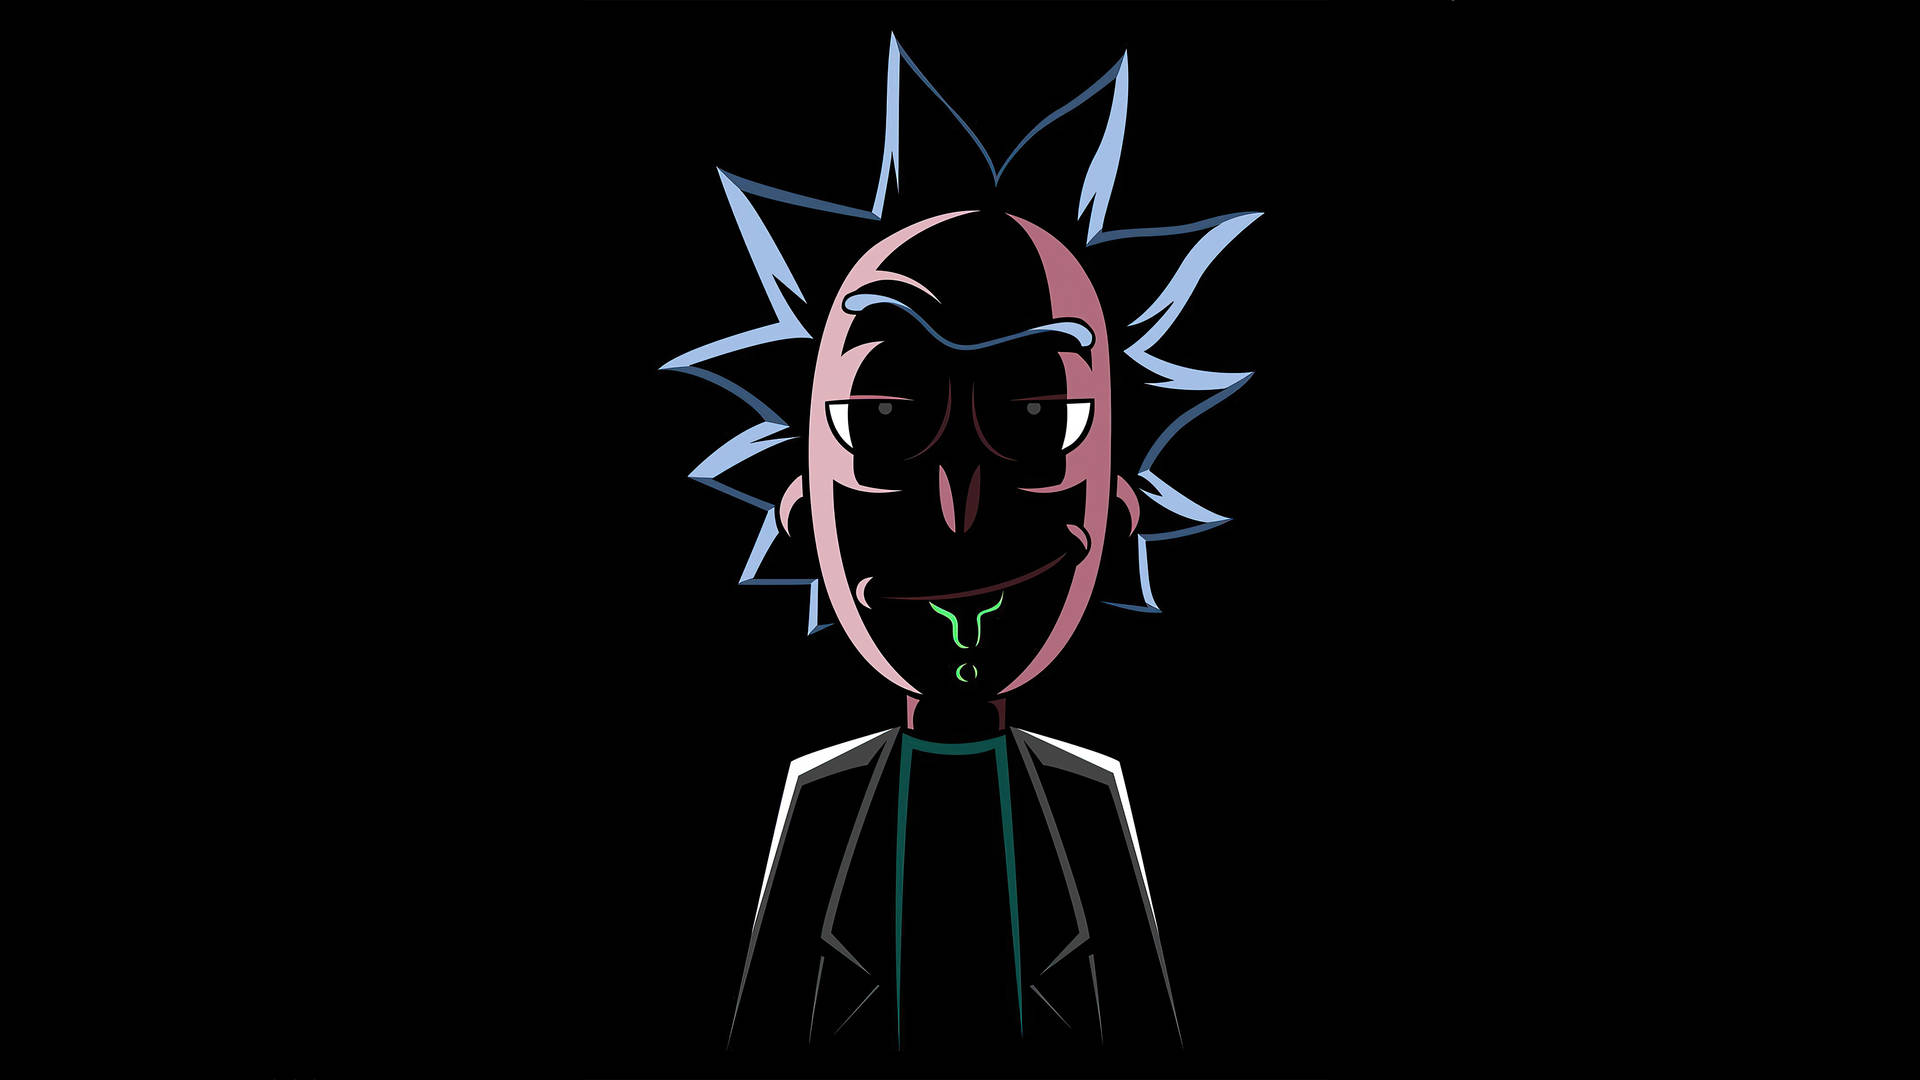 "The one and only Rick Sanchez, always ready to face impossible odds." Wallpaper